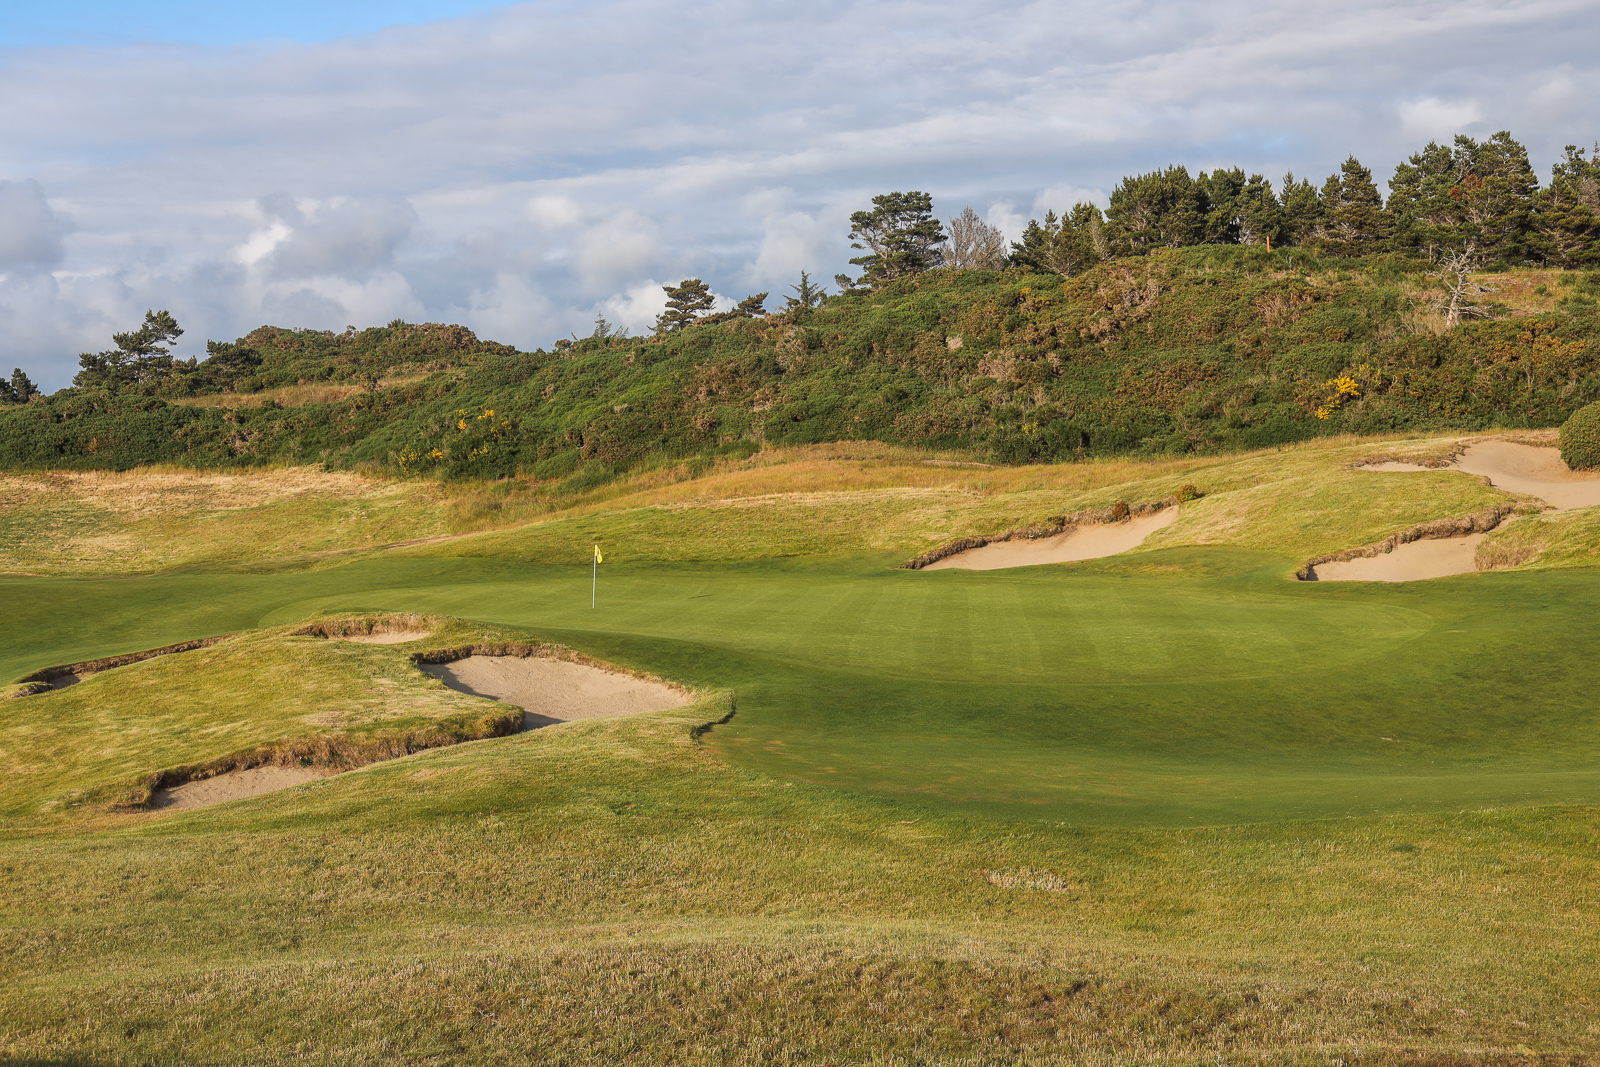 The 18th green at Pacific Dunes.